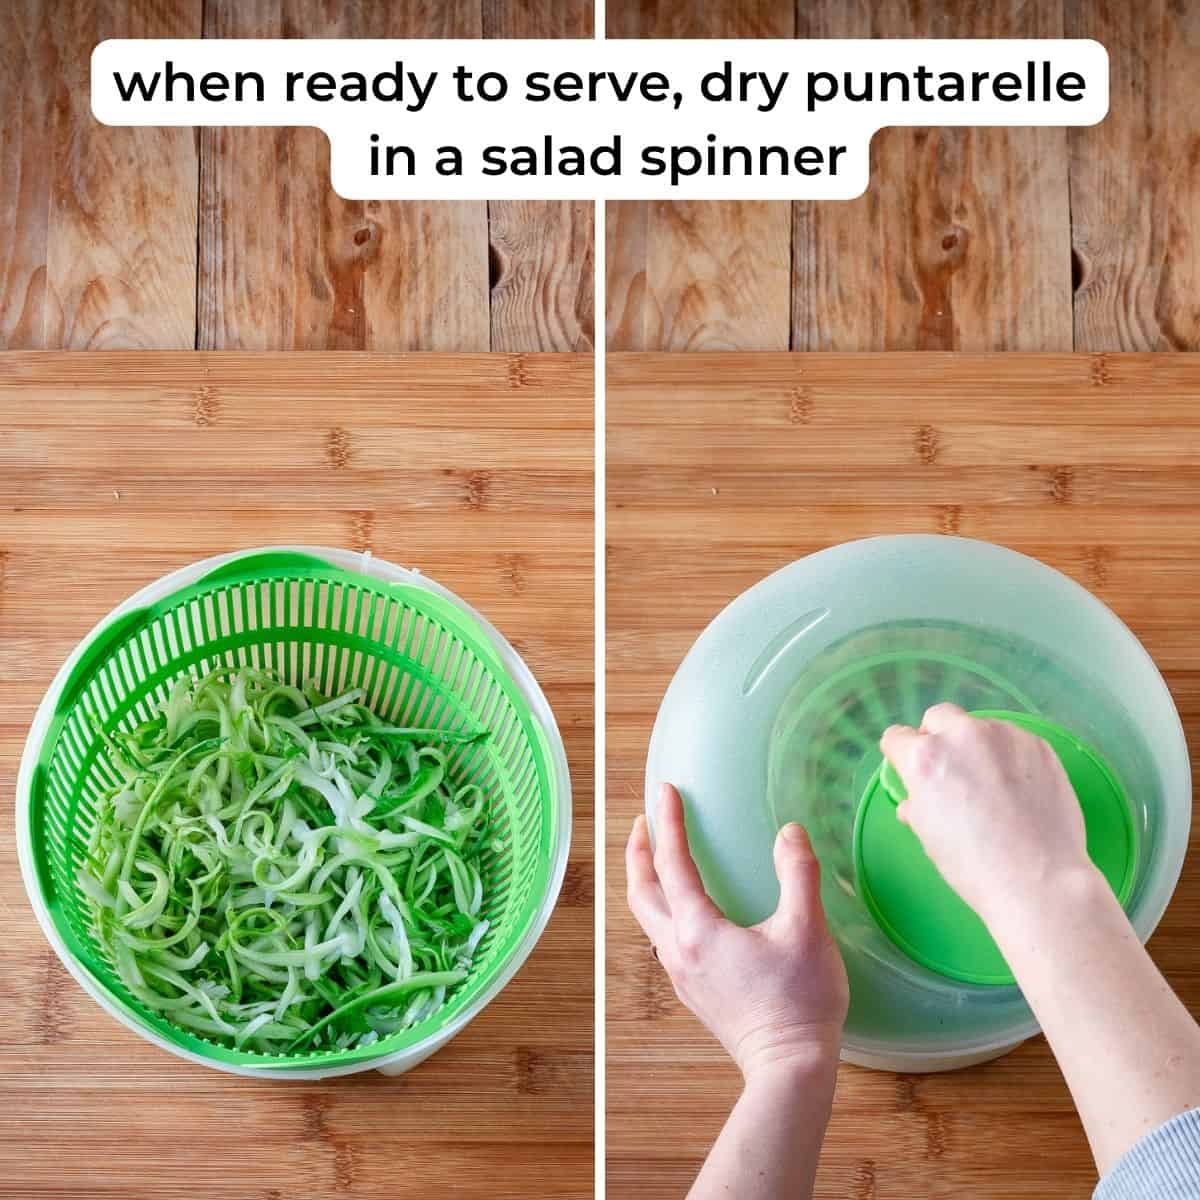 Drying puntarelle in a salad spinner.